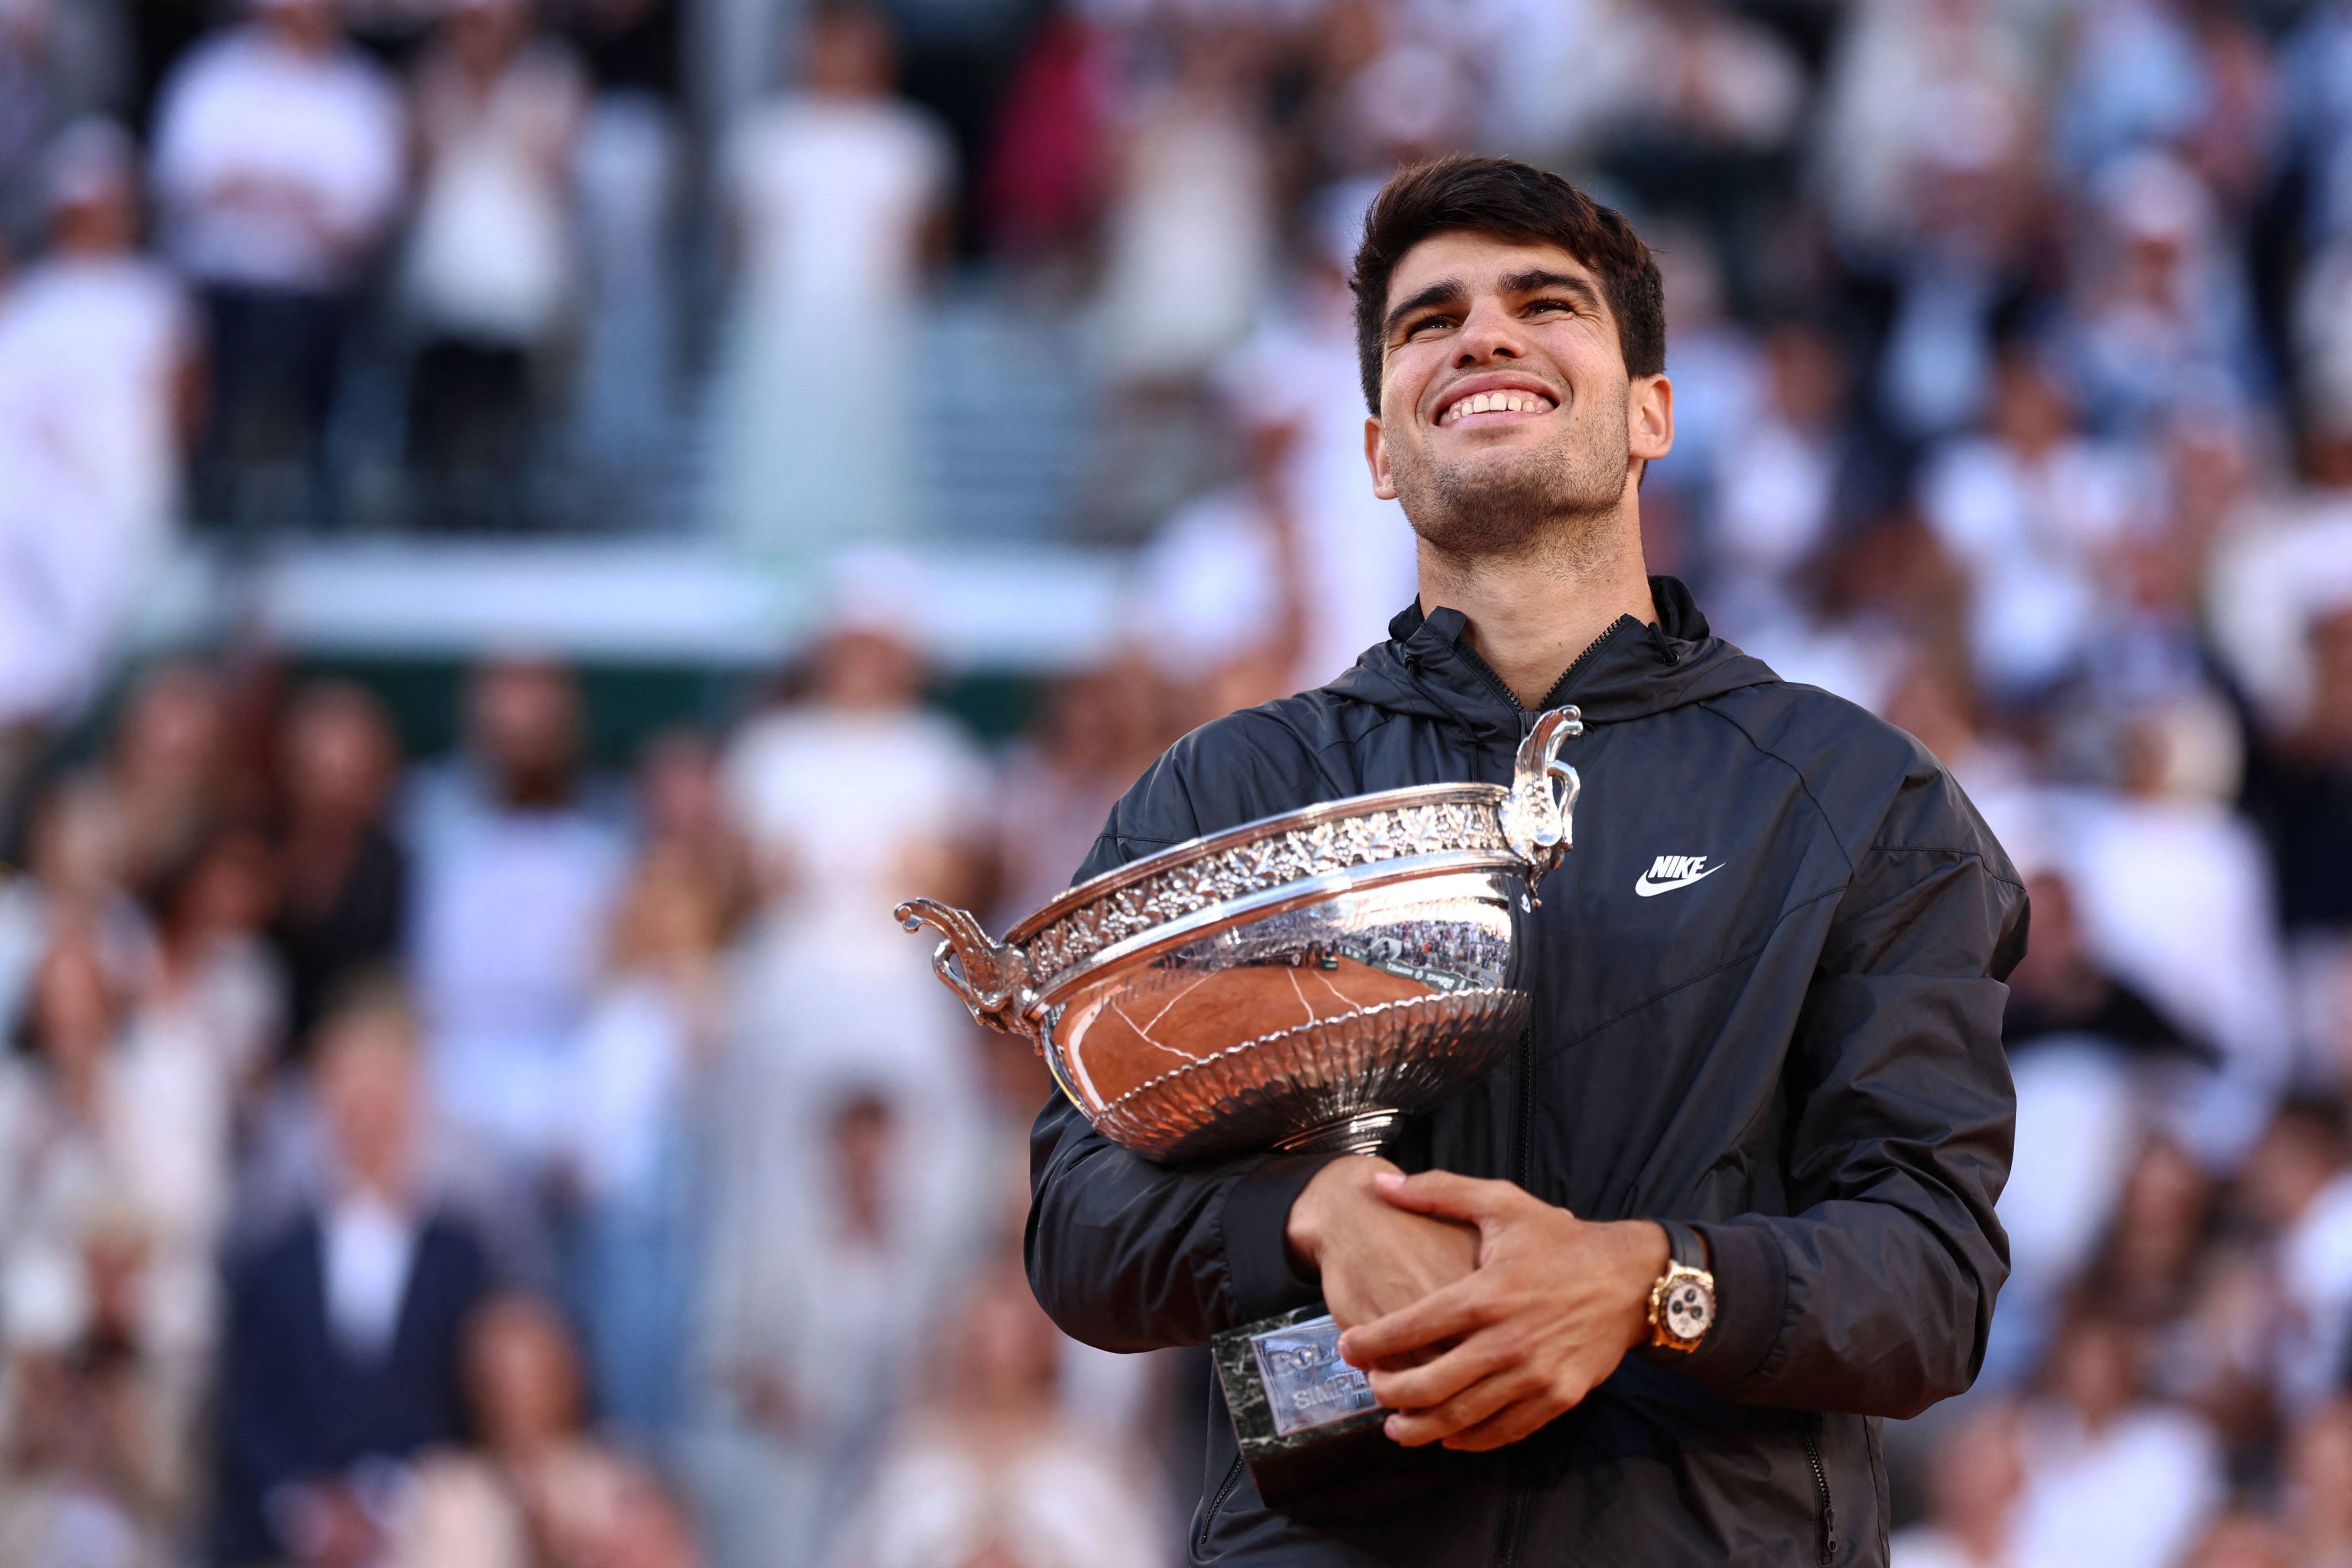 Carlos Alcaraz is all smiles after beating Alexander Zverev to become the French Open champion. Photo: AFP